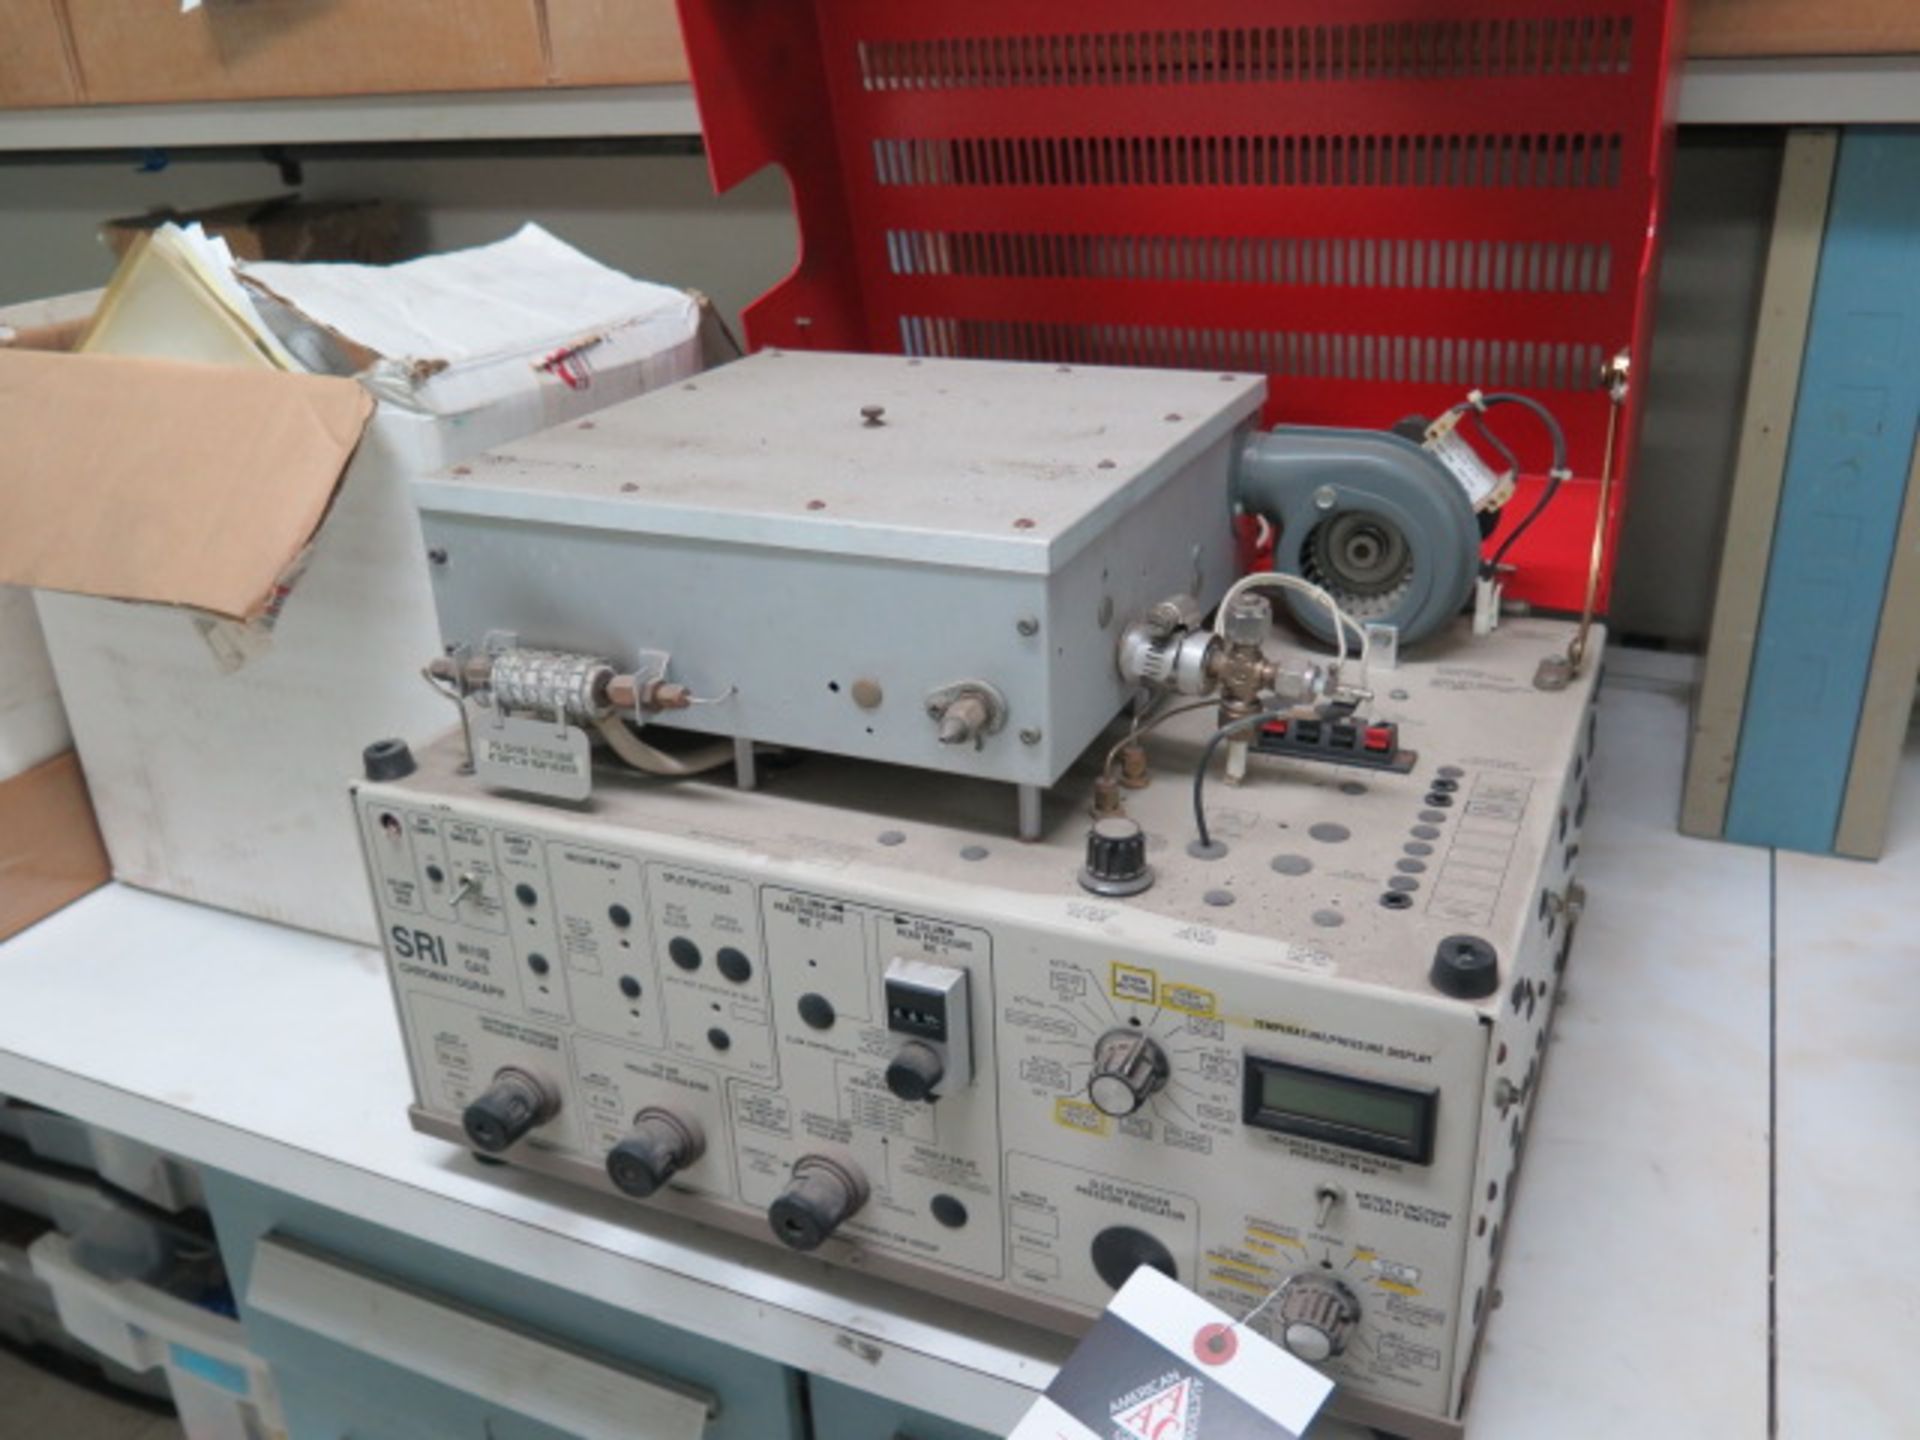 SRI 8610B Gas Chromatograph w/ Acces (SOLD AS-IS - NO WARRANTY) - Image 2 of 15